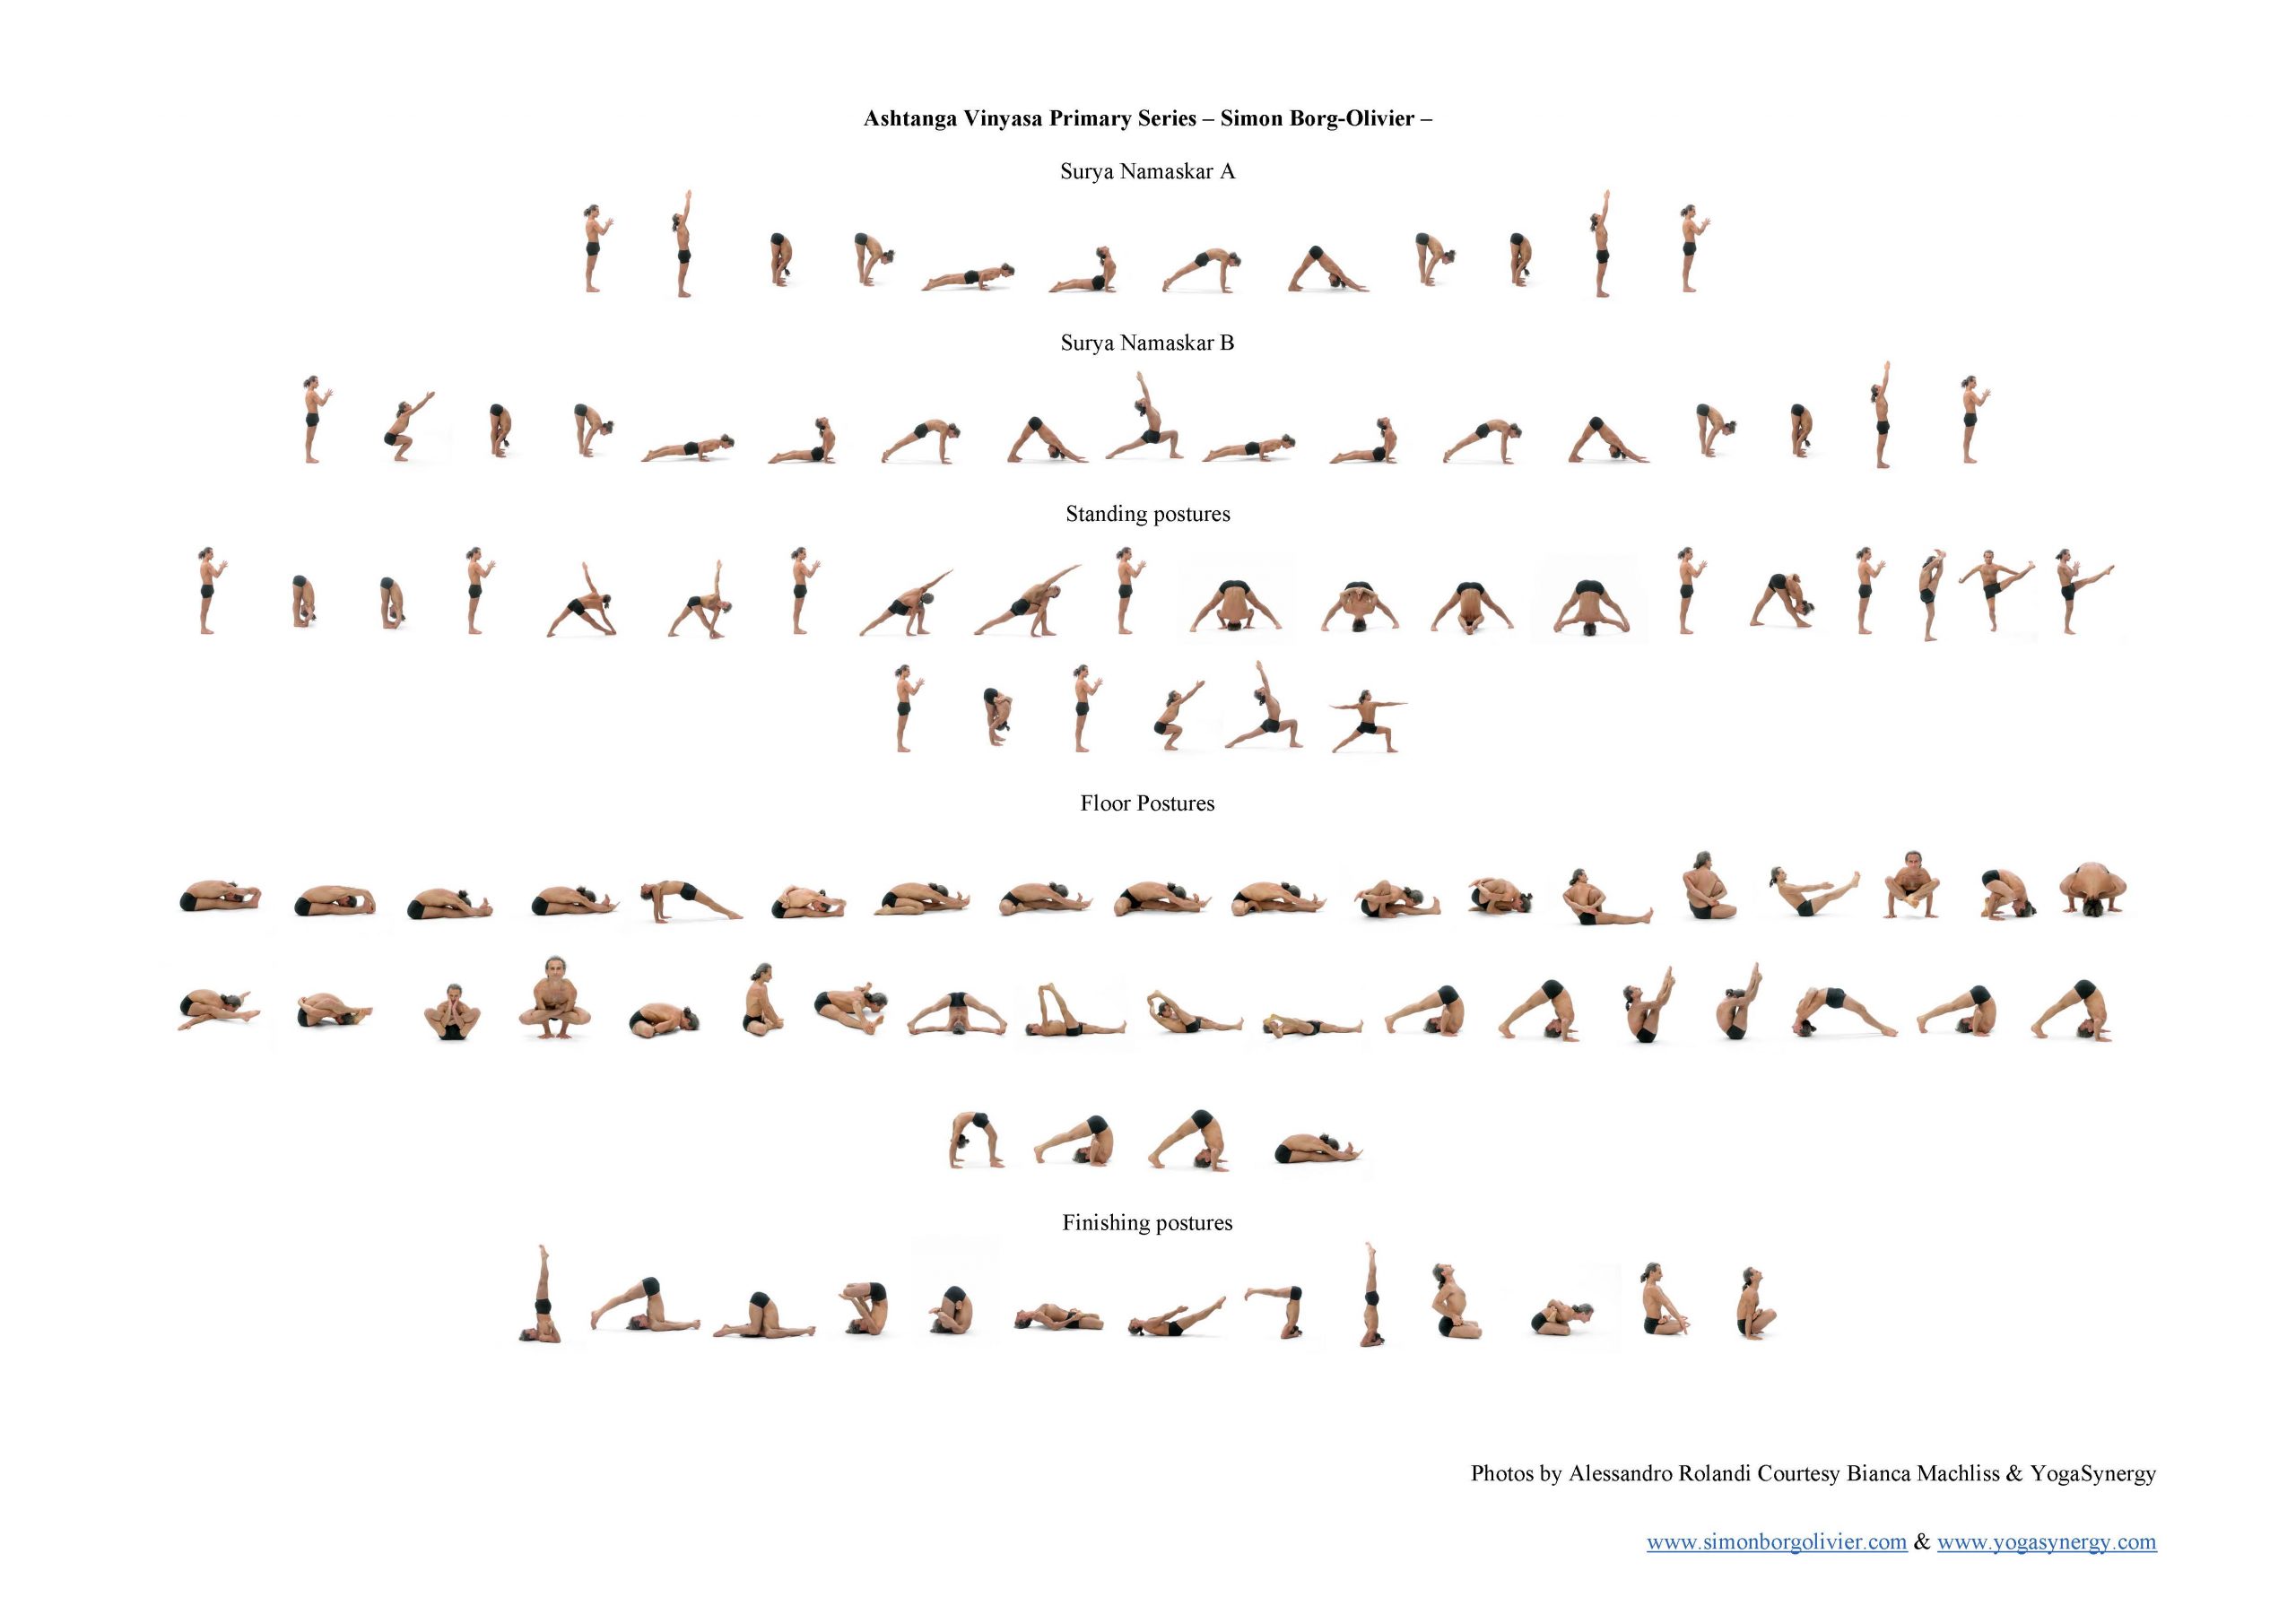 This image includes photographs and text showing and describing the Ashtanga Vinyasa Yoga primary series as demonstrated by exercise based physiotherapist and advanced yoga practitioner Simon Borg-Olivier.